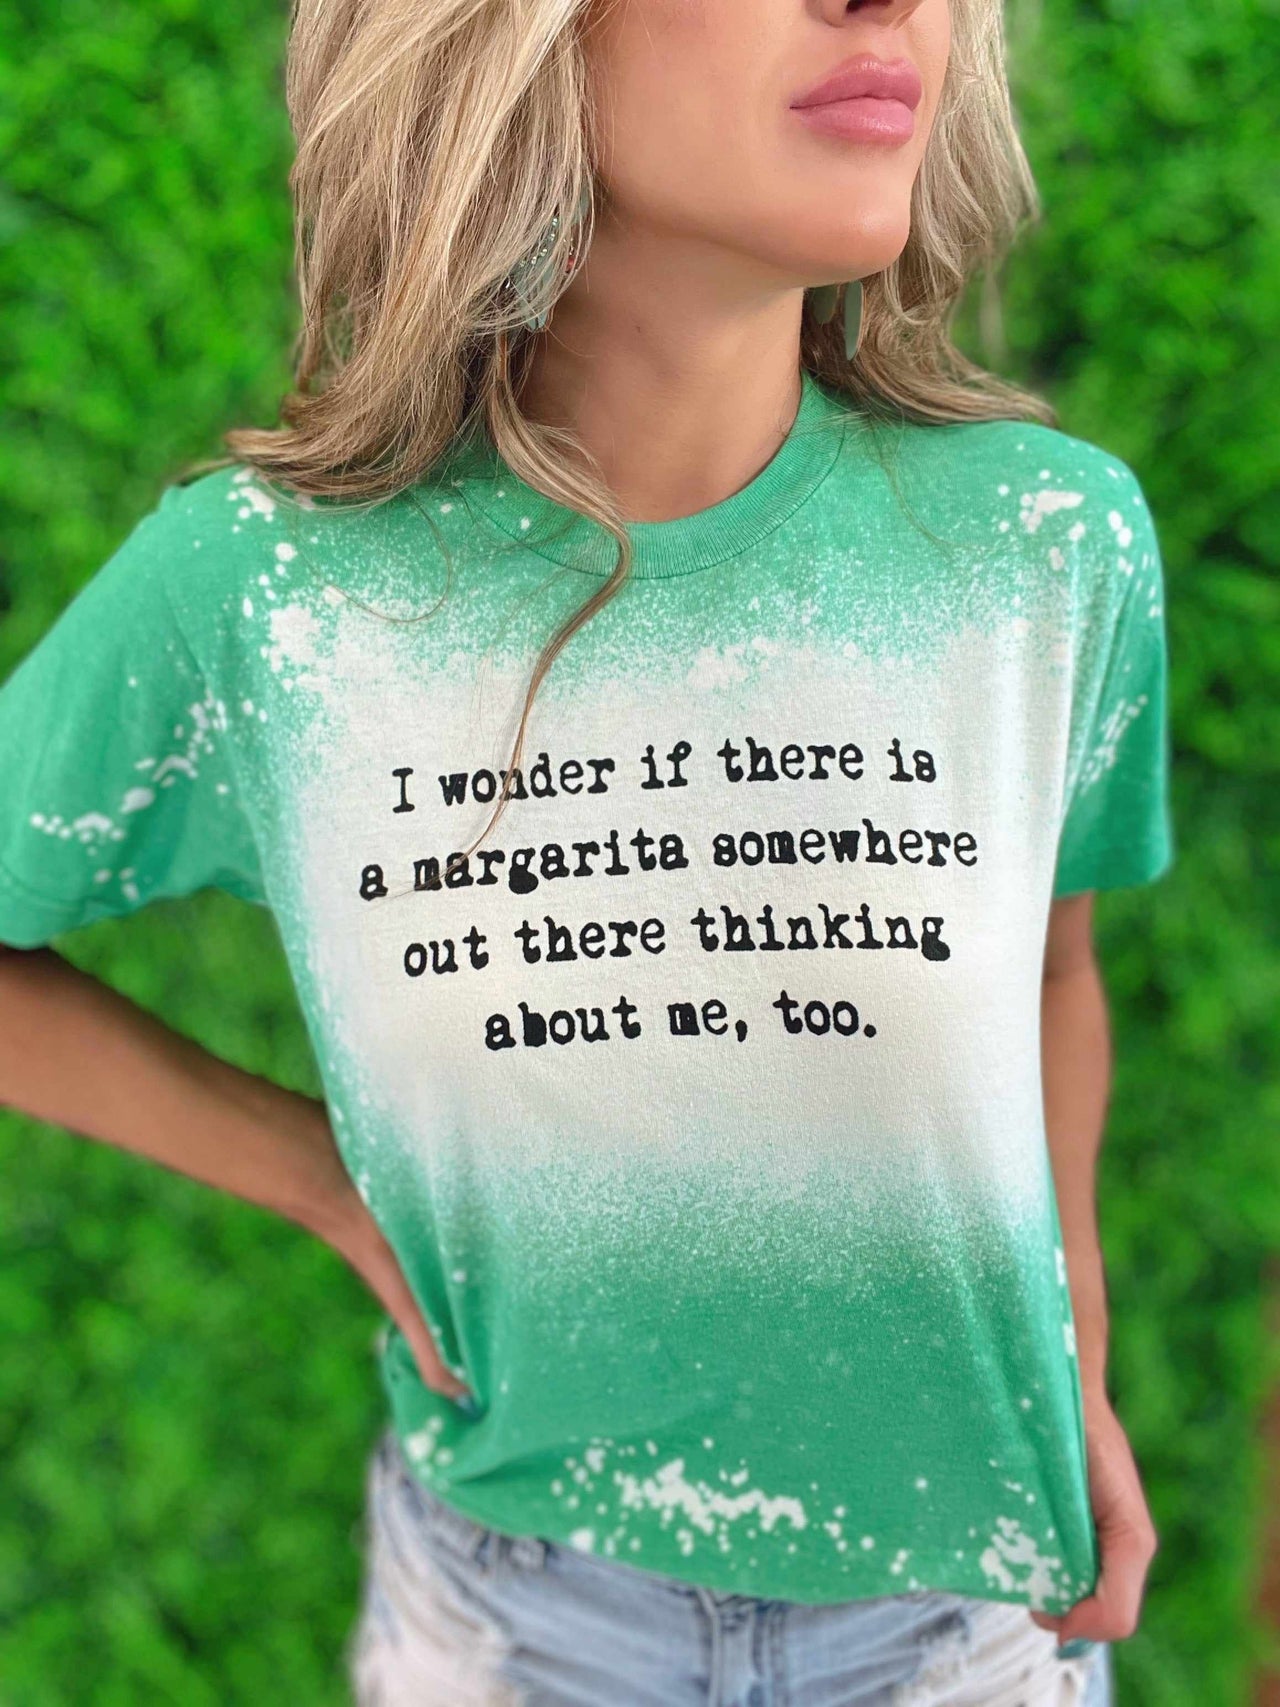 Margarita Thinking About Me Too T shirt